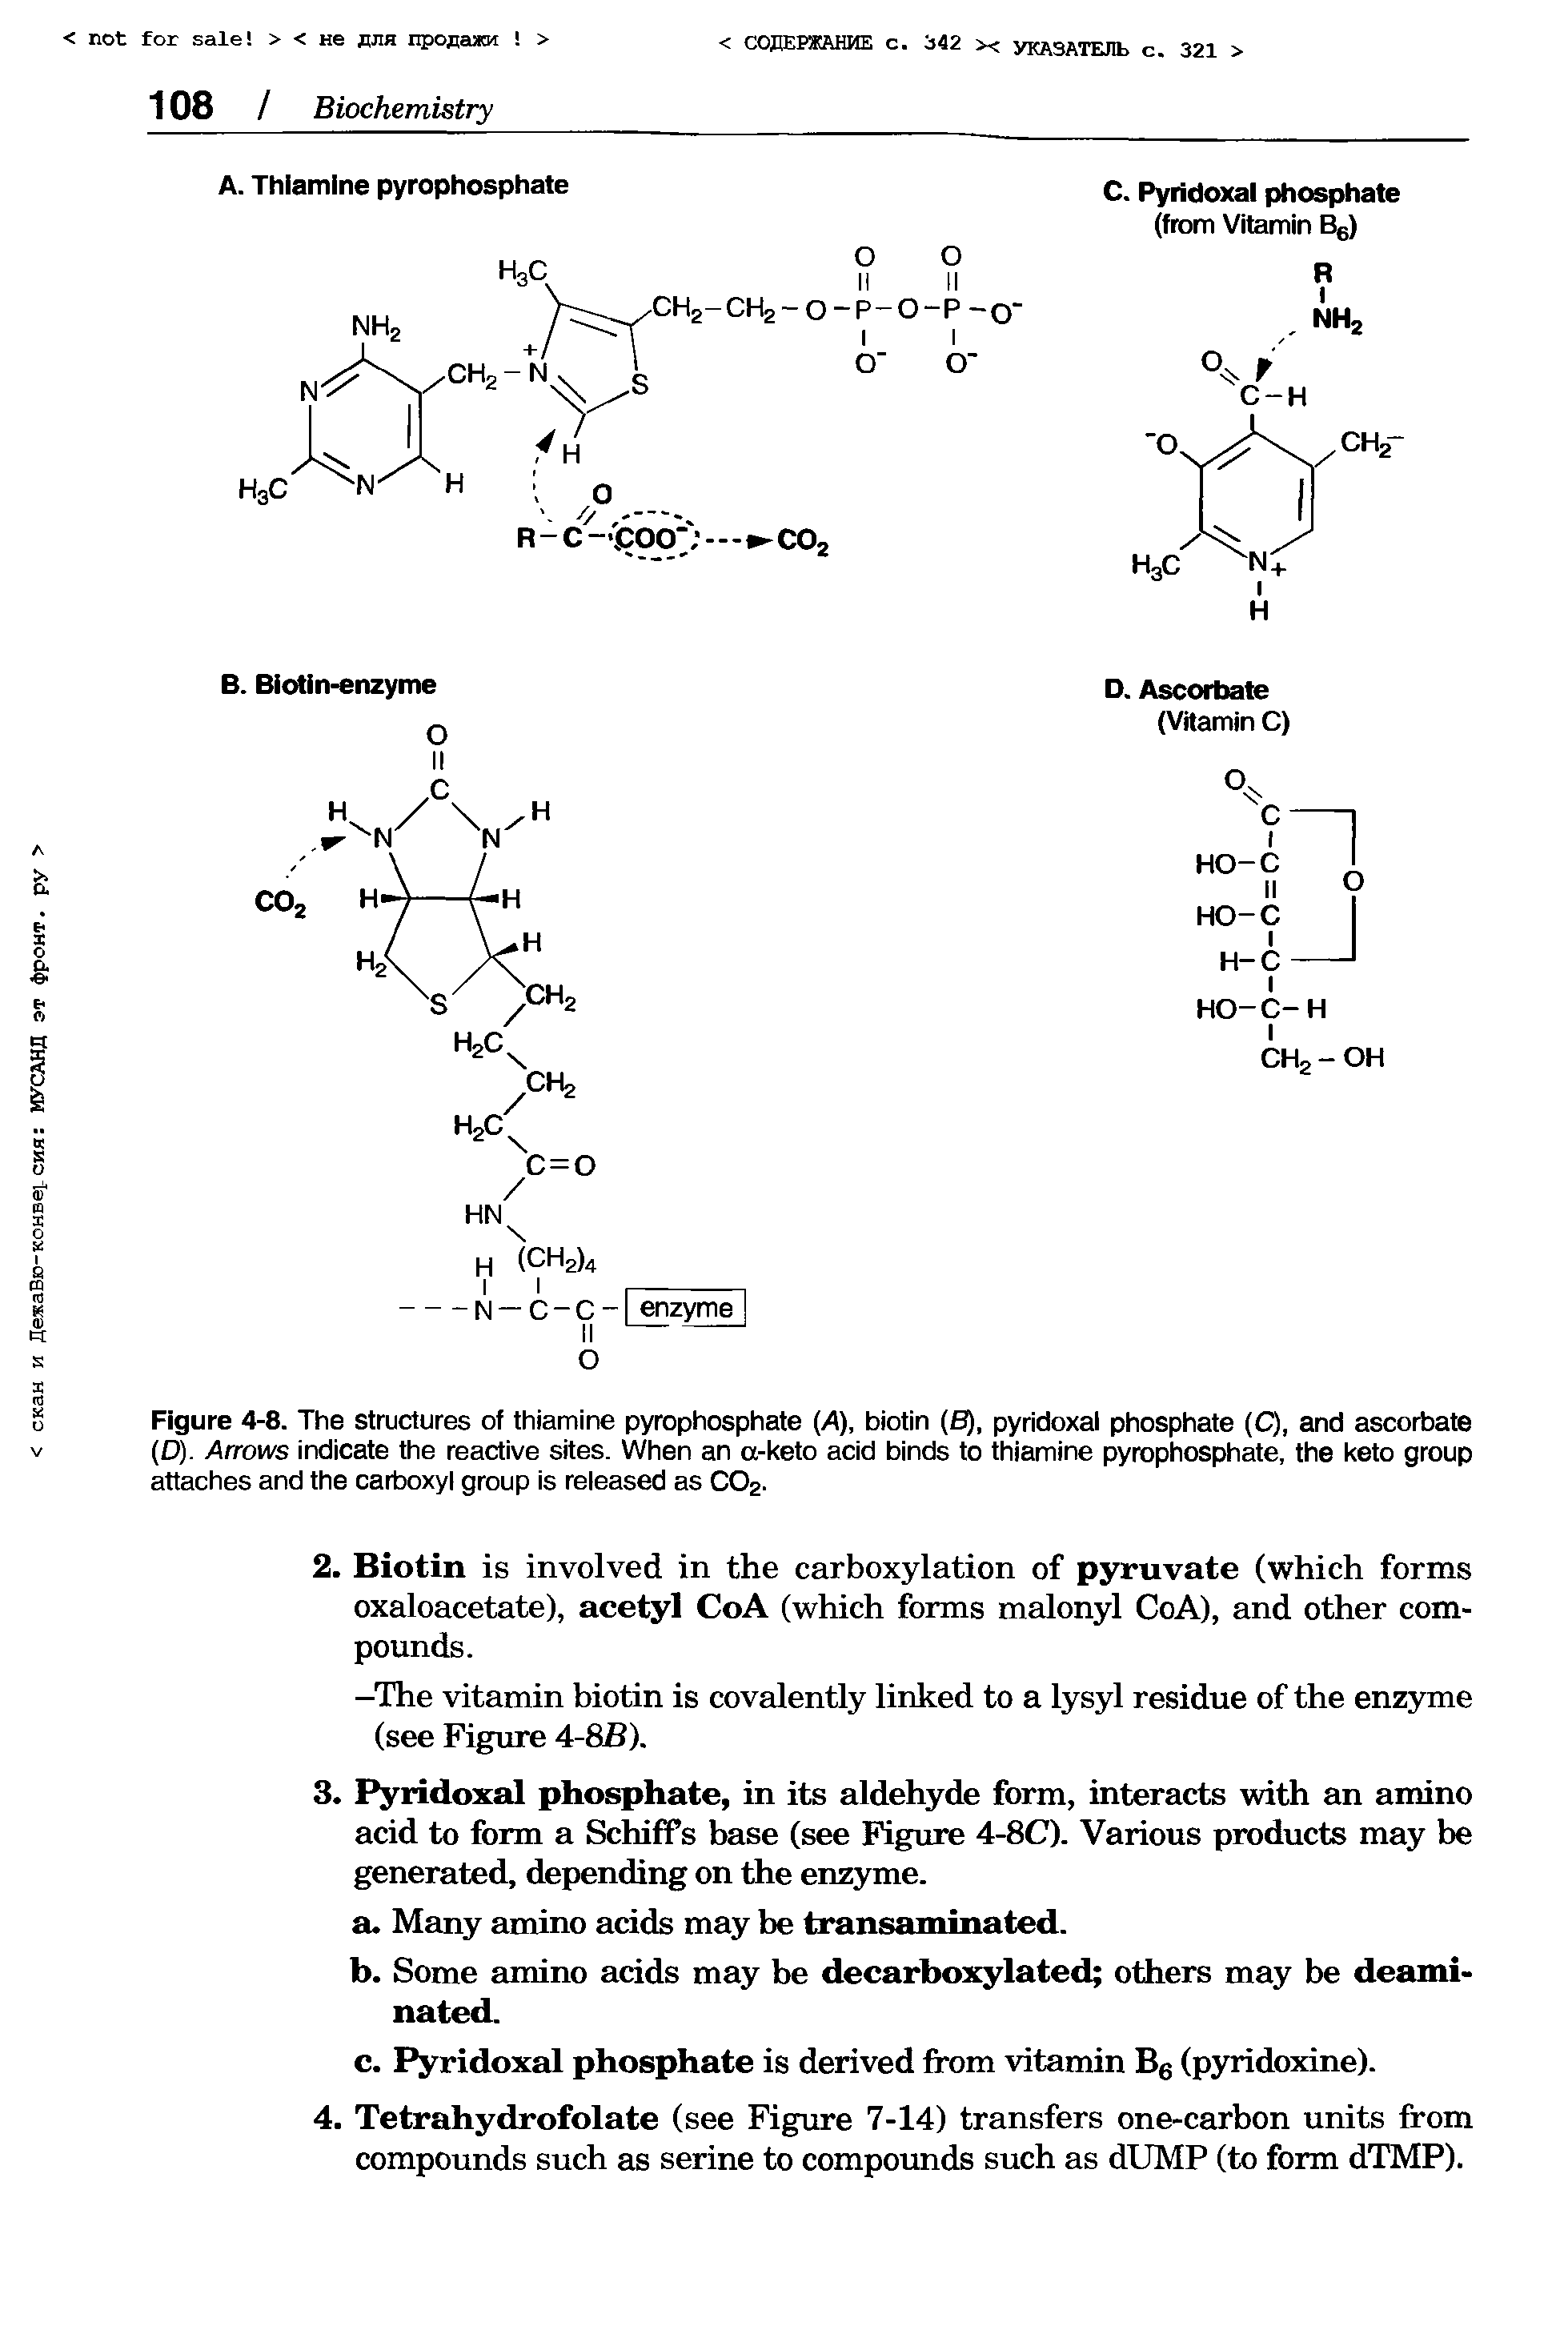 Figure 4-8. The structures of thiamine pyrophosphate (A), biotin (fi), pyridoxal phosphate (Q, and ascorbate (D). Arrows indicate the reactive sites. When an a-keto acid binds to thiamine pyrophosphate, the keto group attaches and the carboxyl group is released as C02.